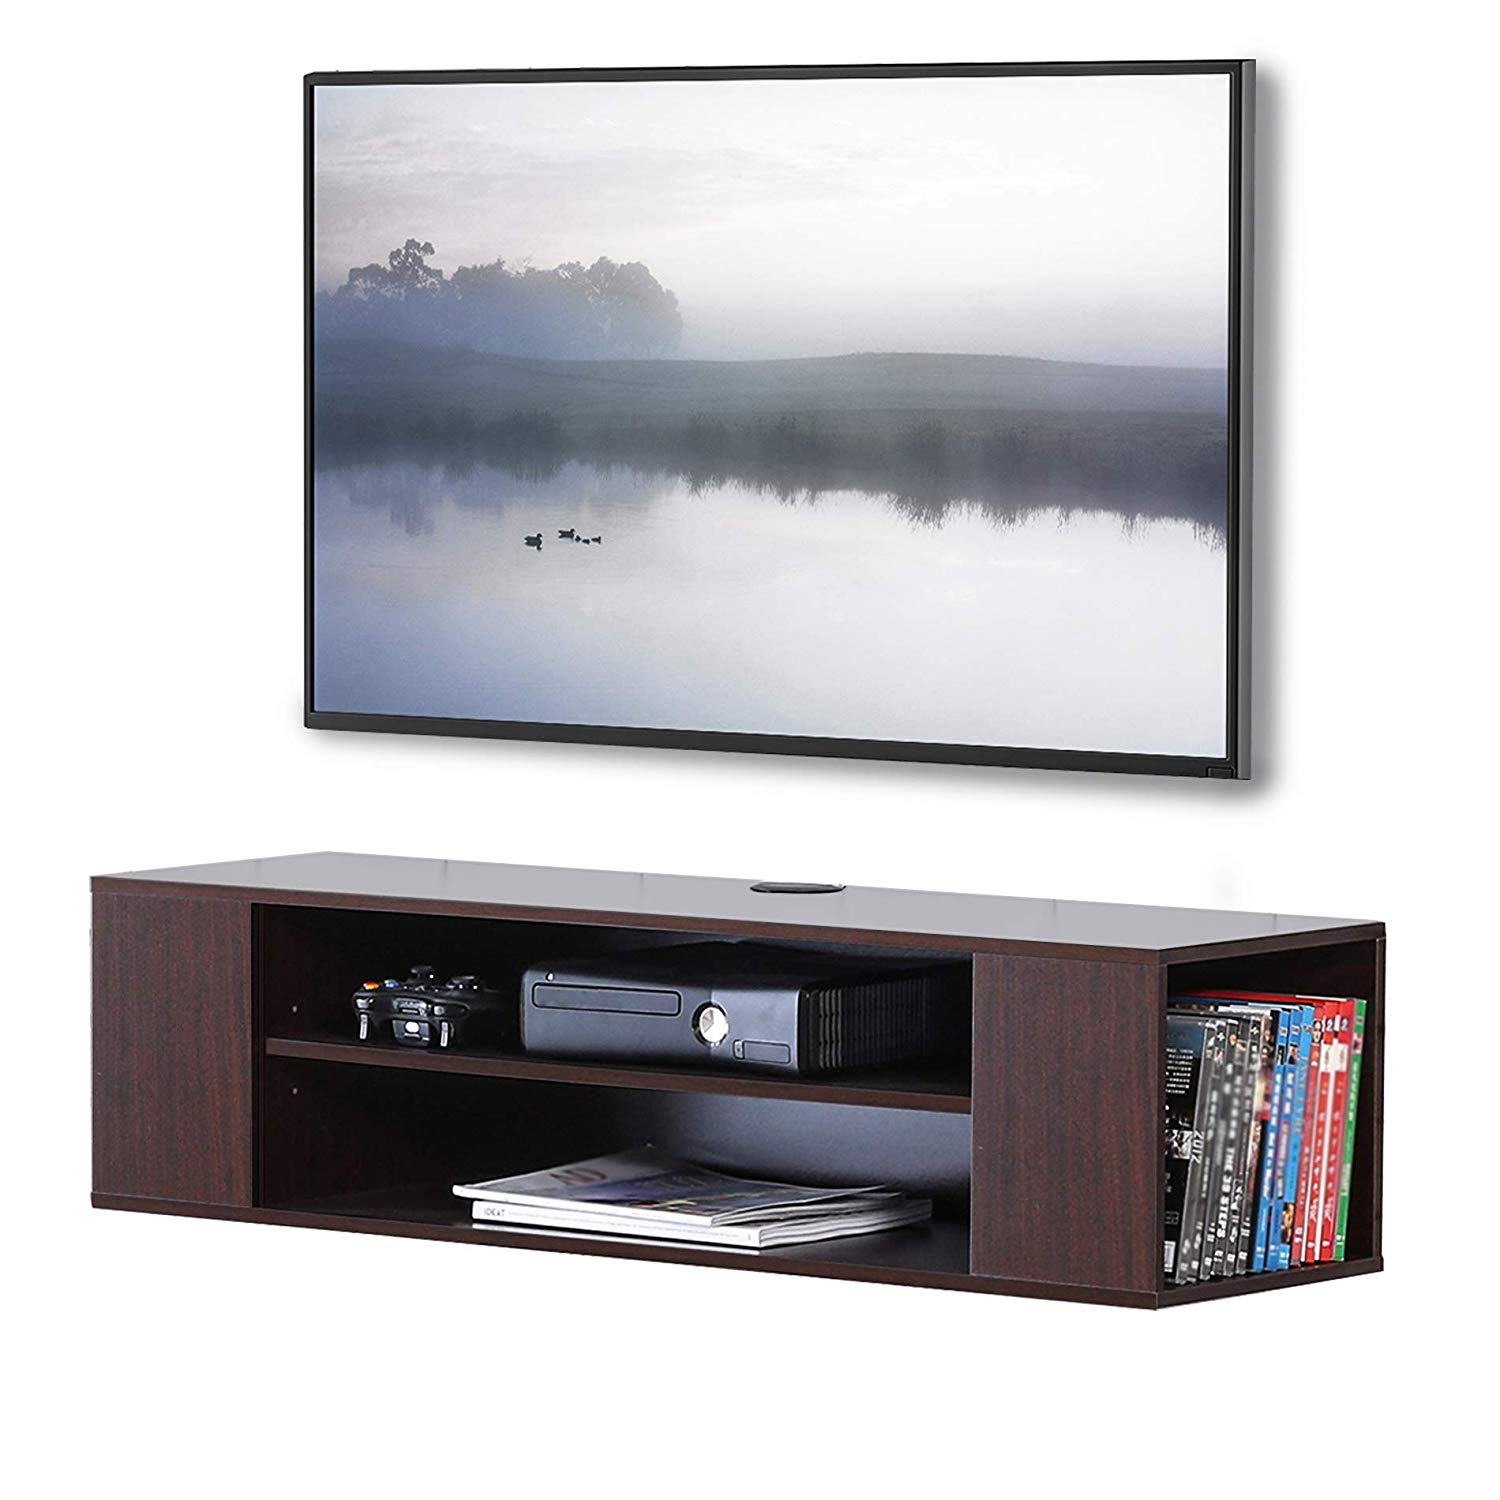 Floating Fireplace Tv Stand Fresh Wall Glass Cabinet Ideas Center Floating Plans Decorating